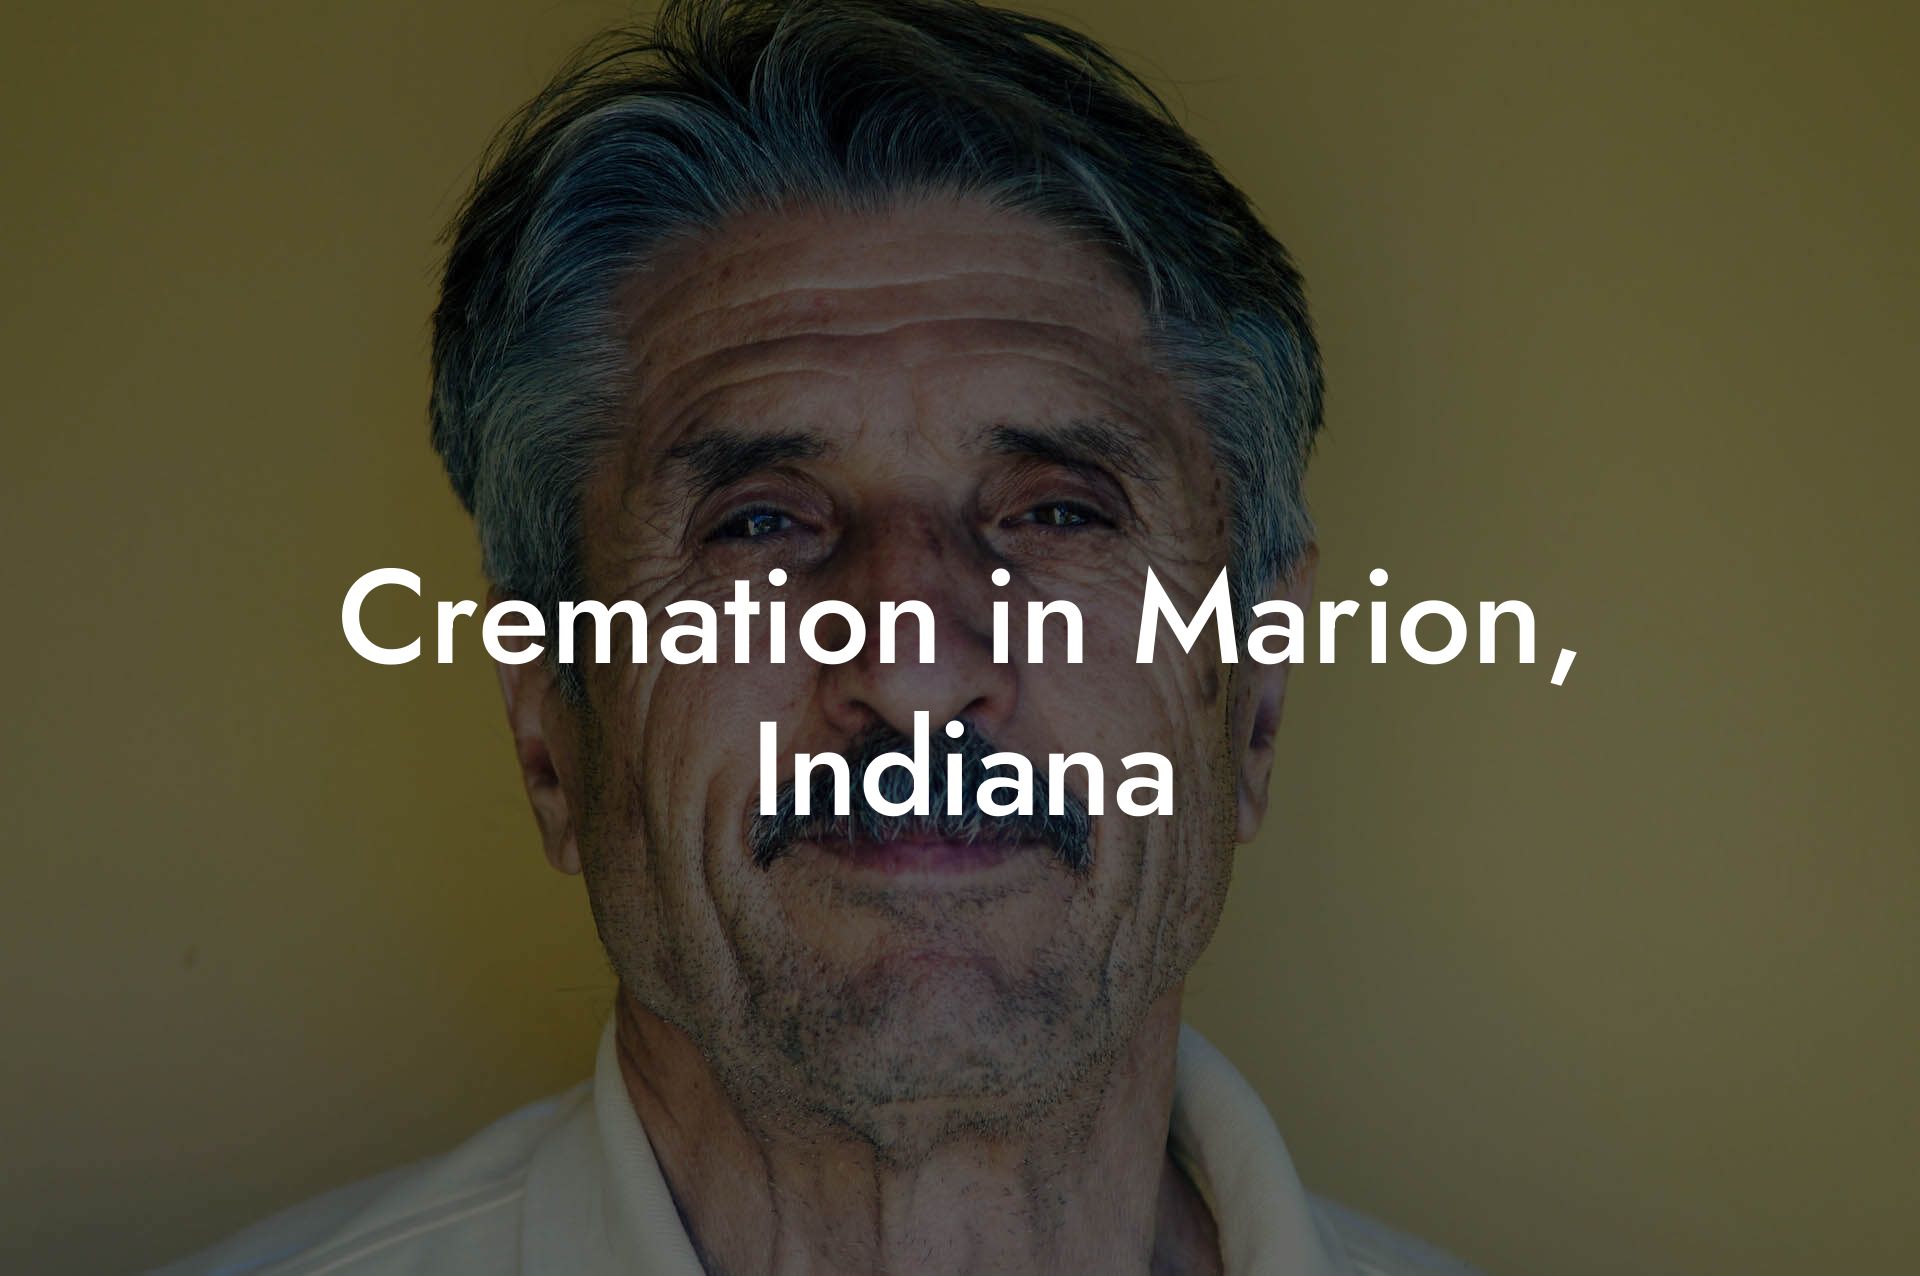 Cremation in Marion, Indiana